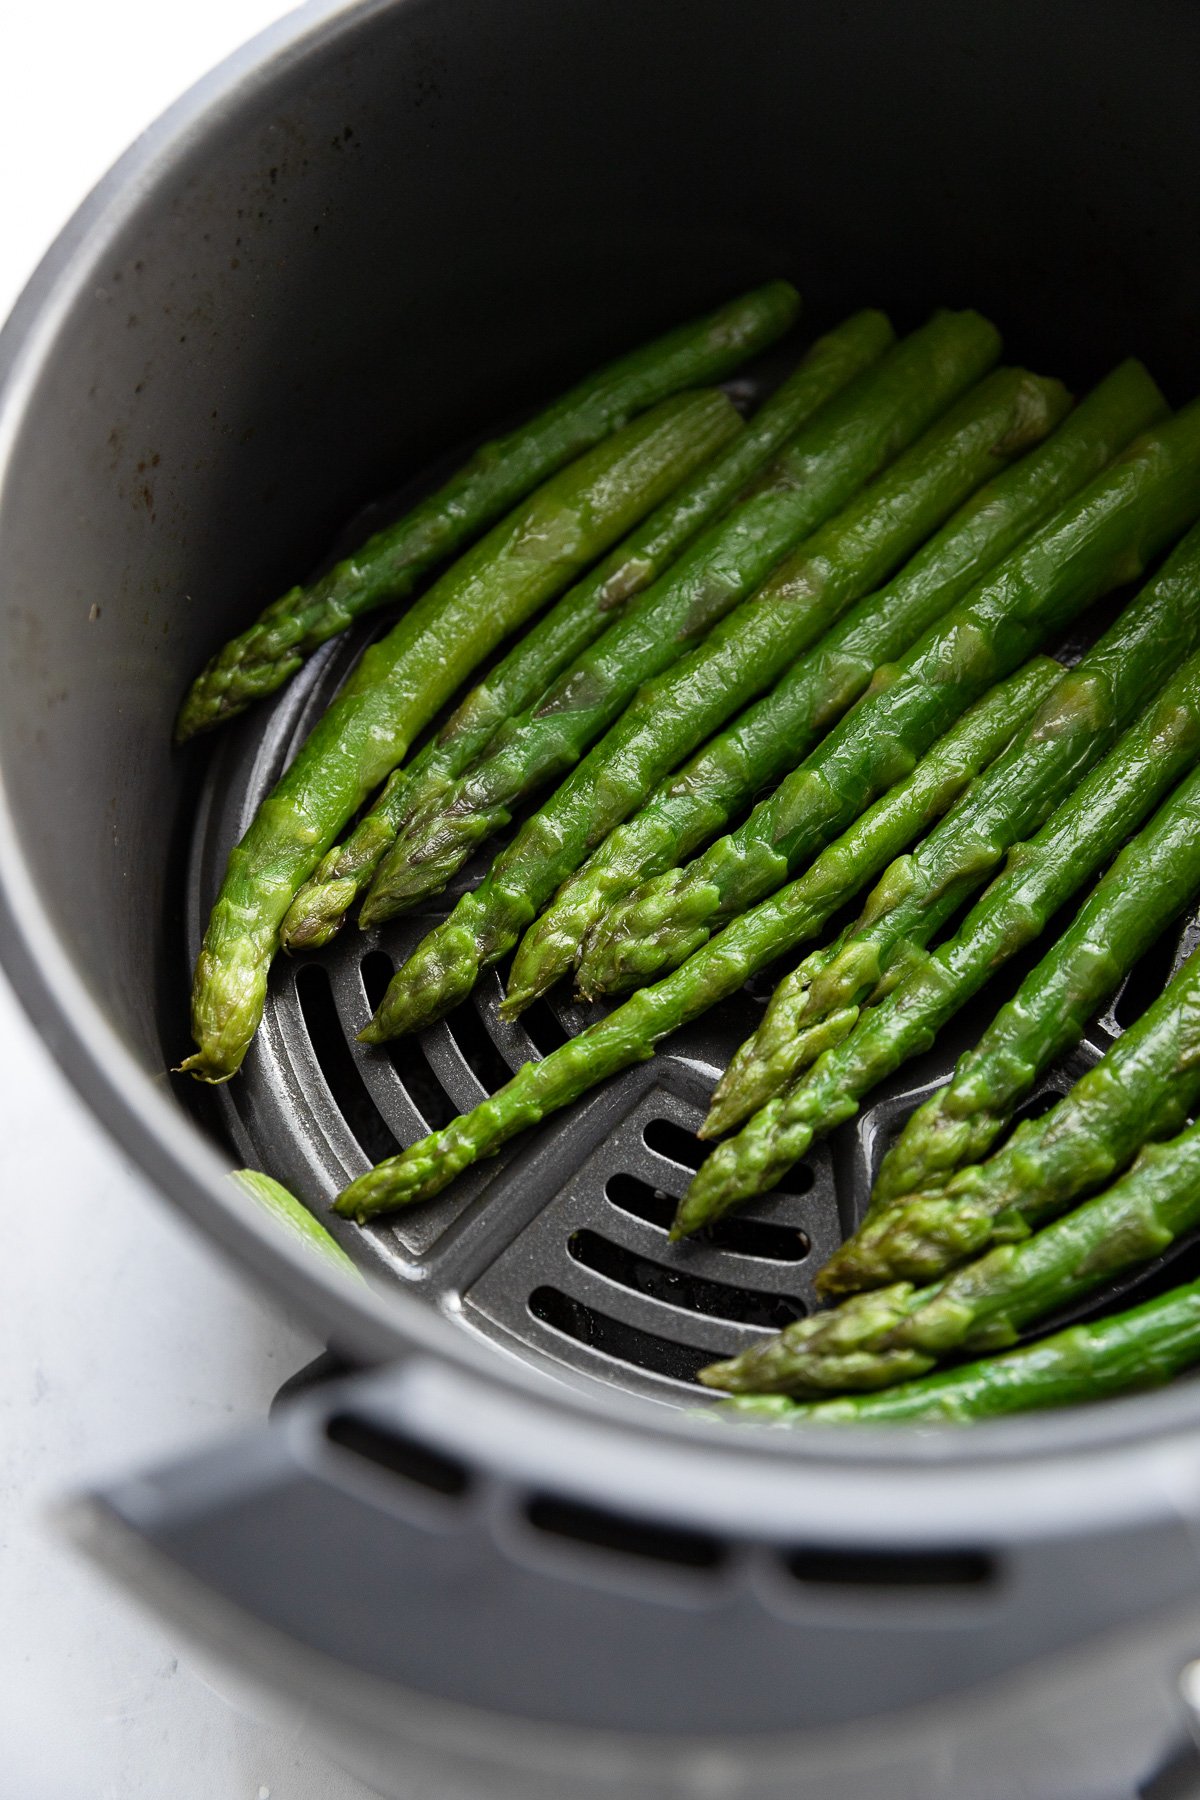 Asparagus spears in basket of air fryer after cooking.